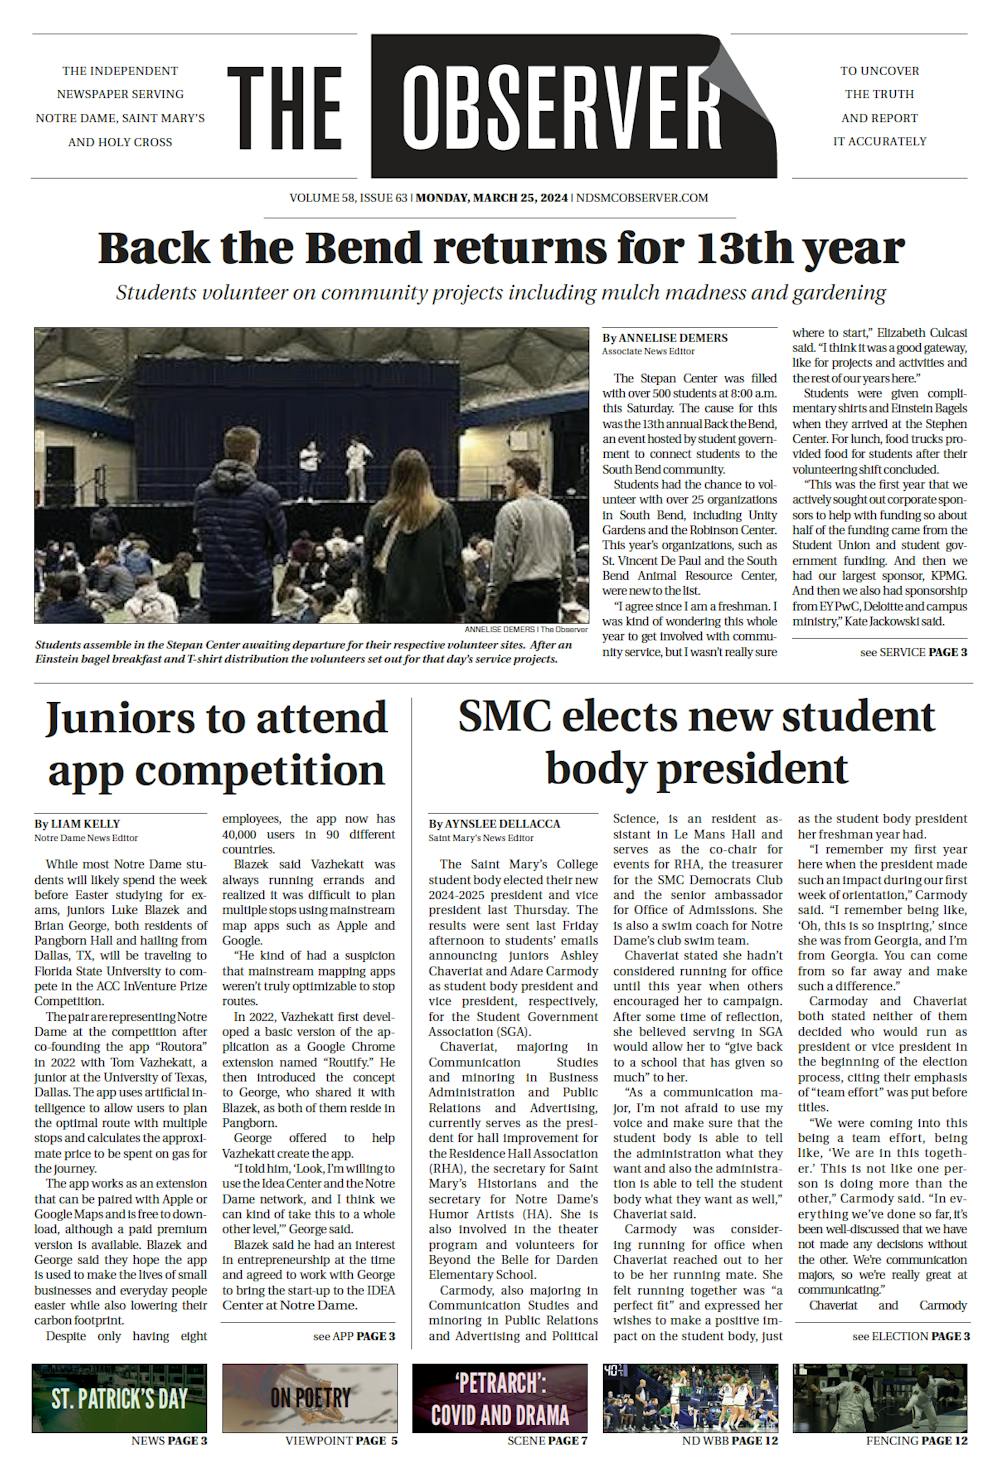 Print Edition for Monday, March 25, 2024